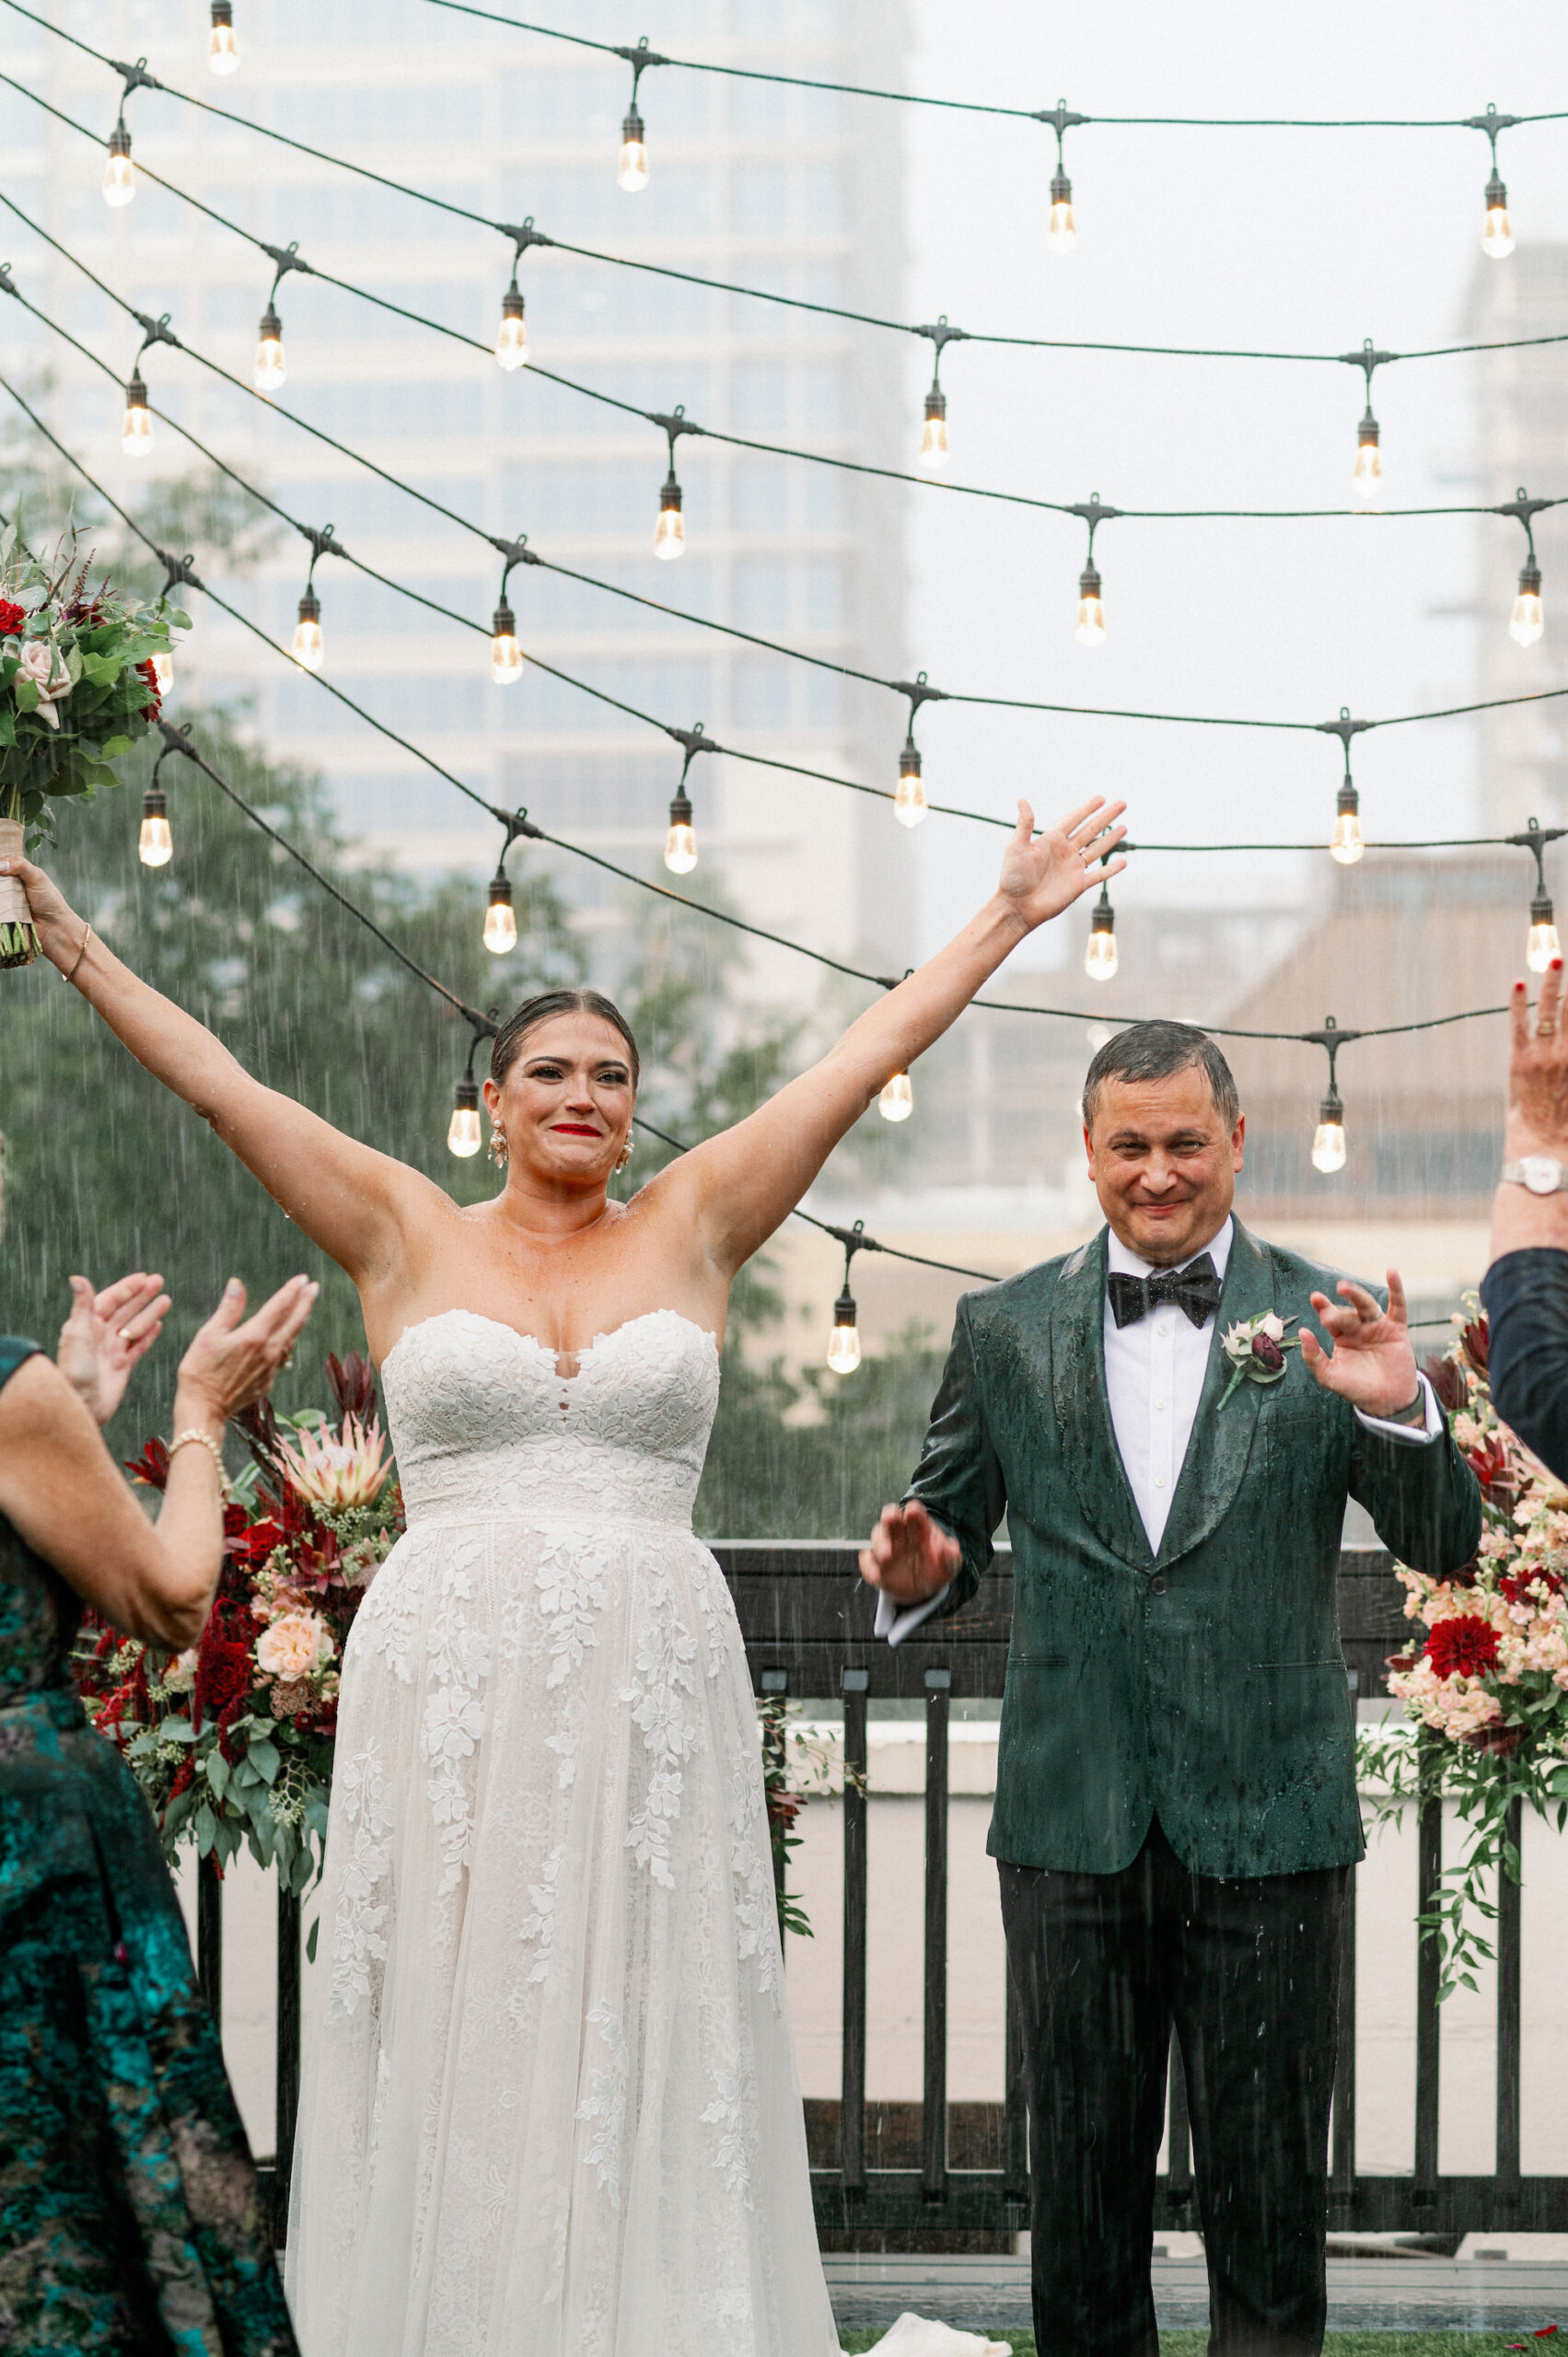 Bride and Groom Rooftop Wedding Ceremony in the Rain | St. Petersburg Wedding Photographers Dewitt for Love Photography